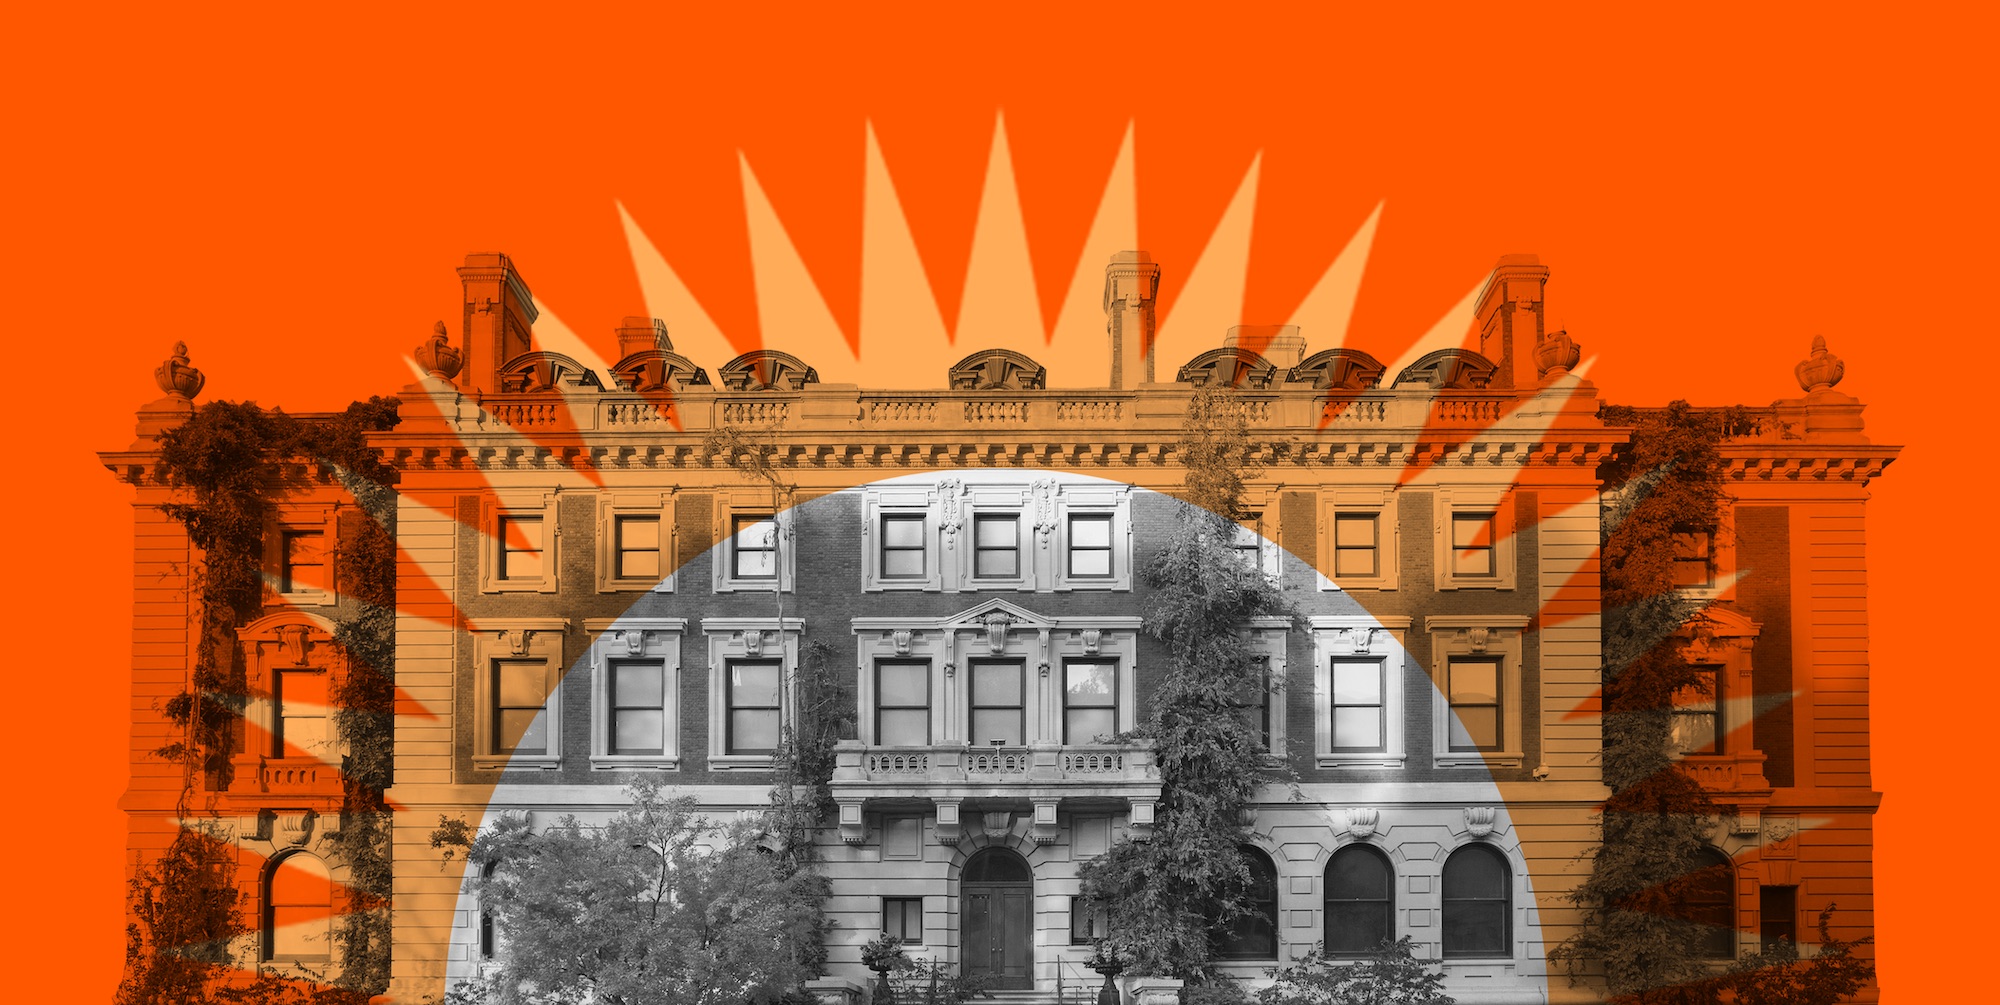 Image of the Carnegie Mansion overlaying an illustrated rising sun.